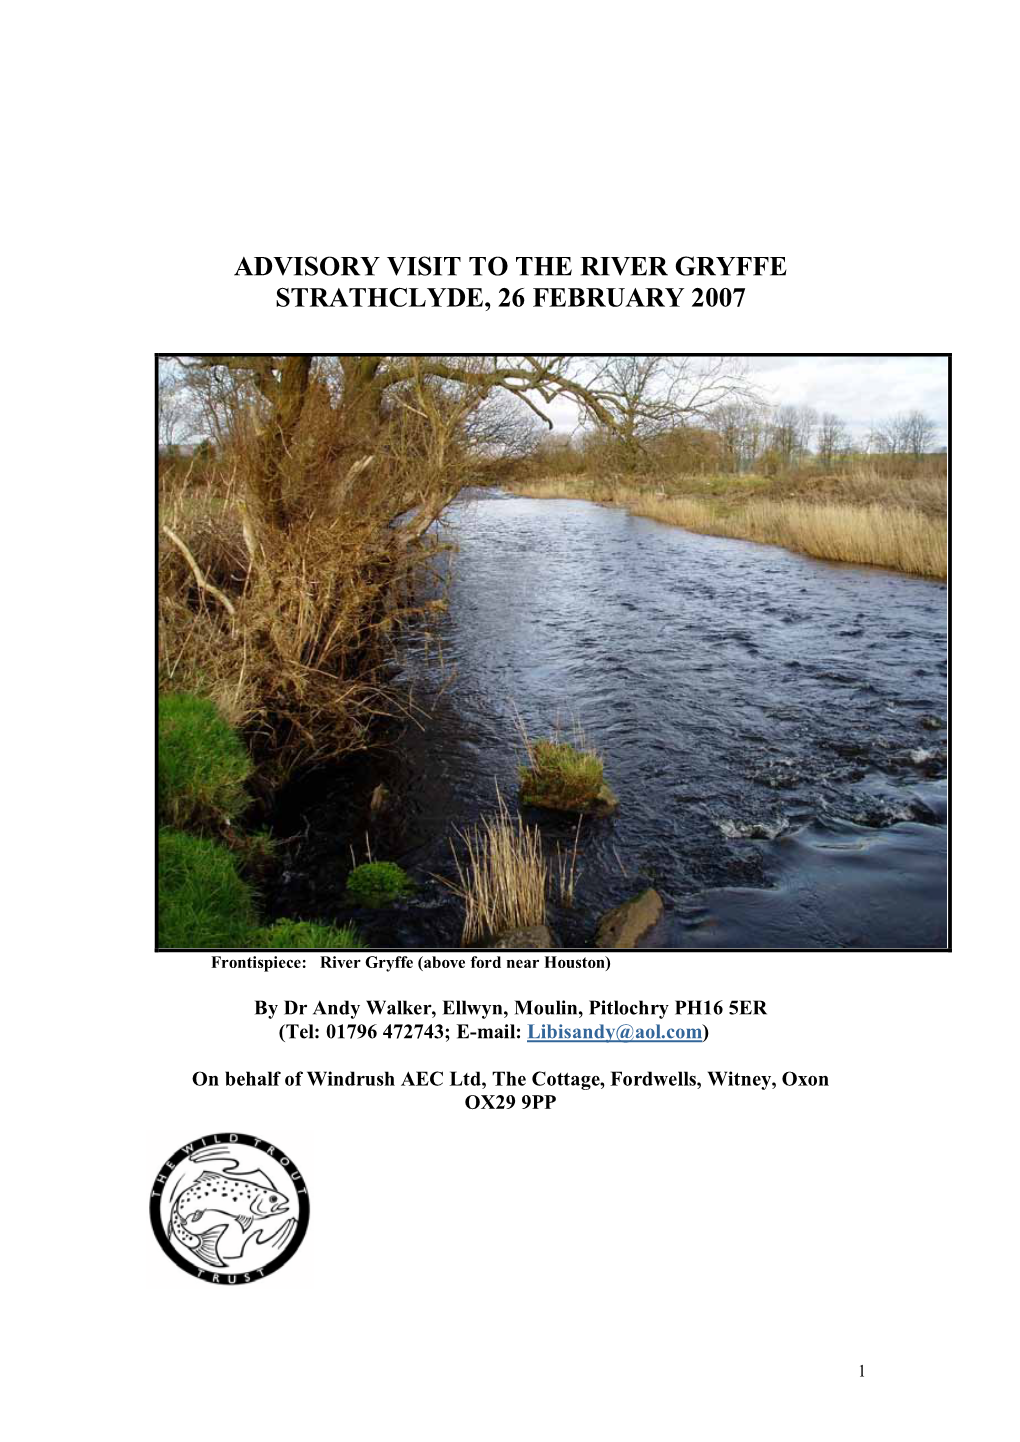 Advisory Visit to the River Gryffe Strathclyde, 26 February 2007